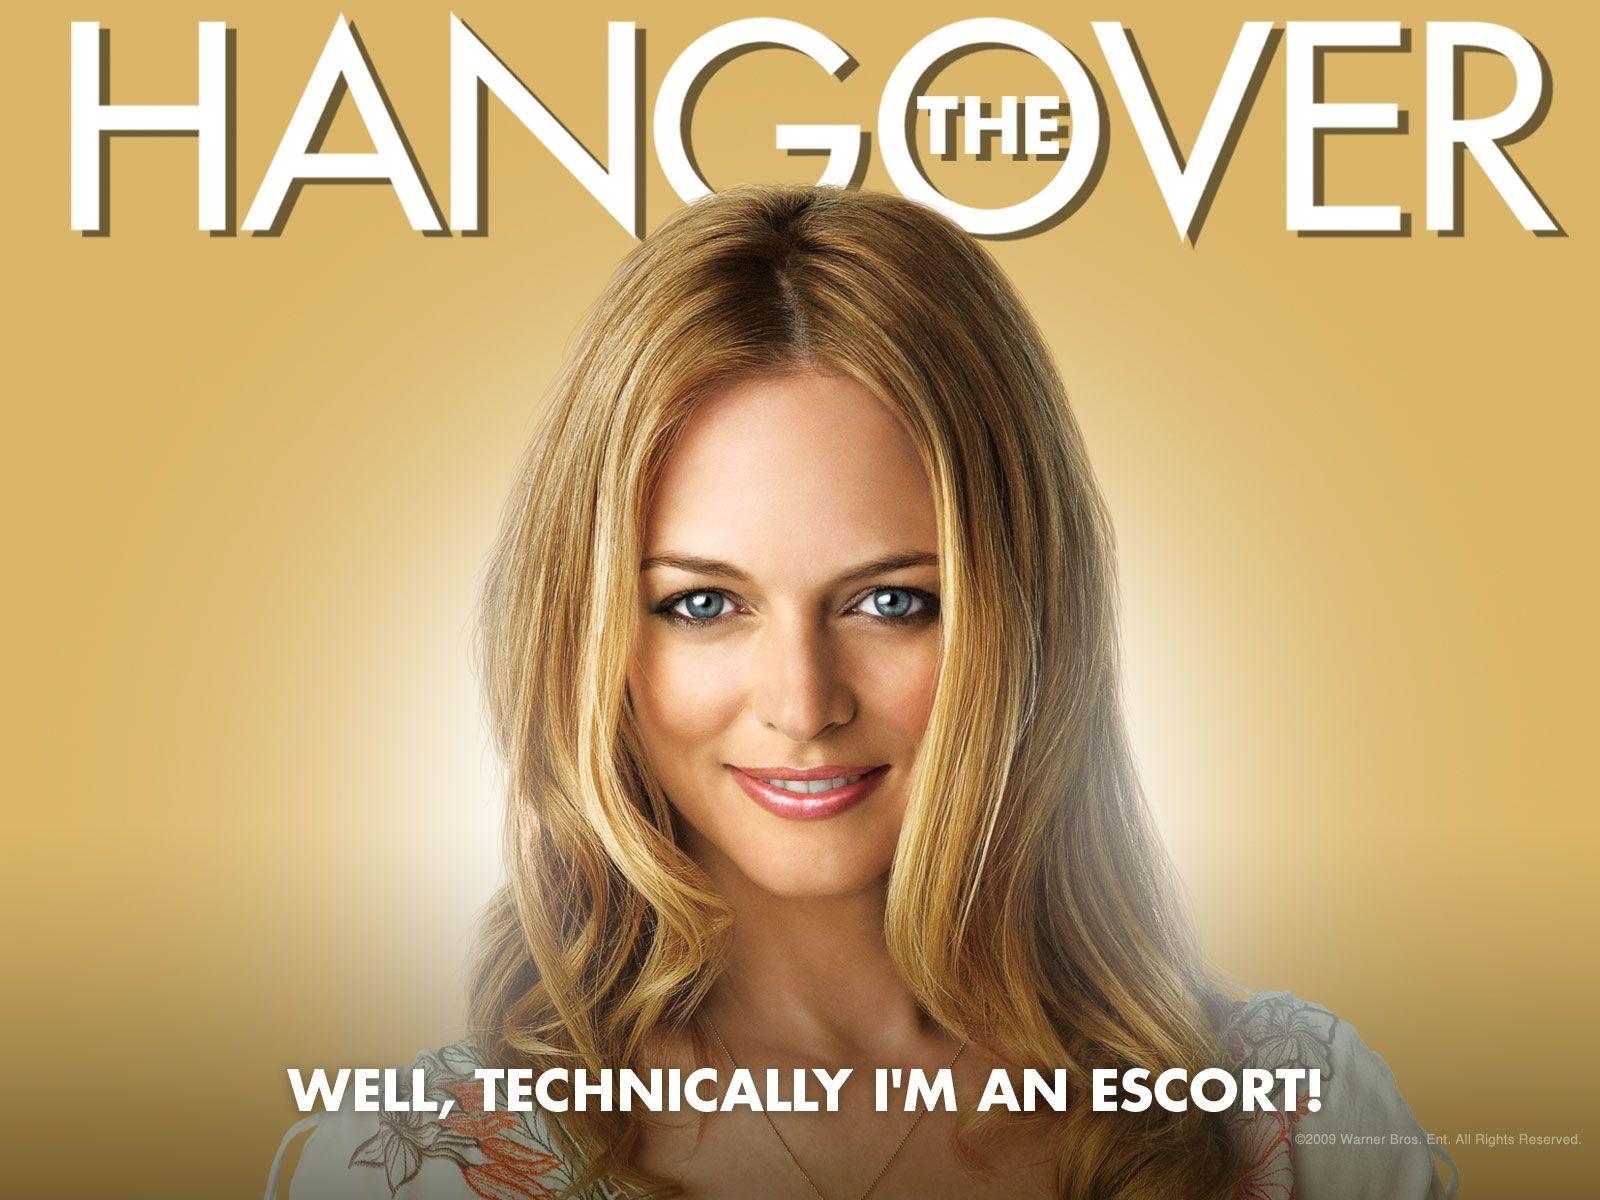 Heather Graham In The Hangover, High Definition, High